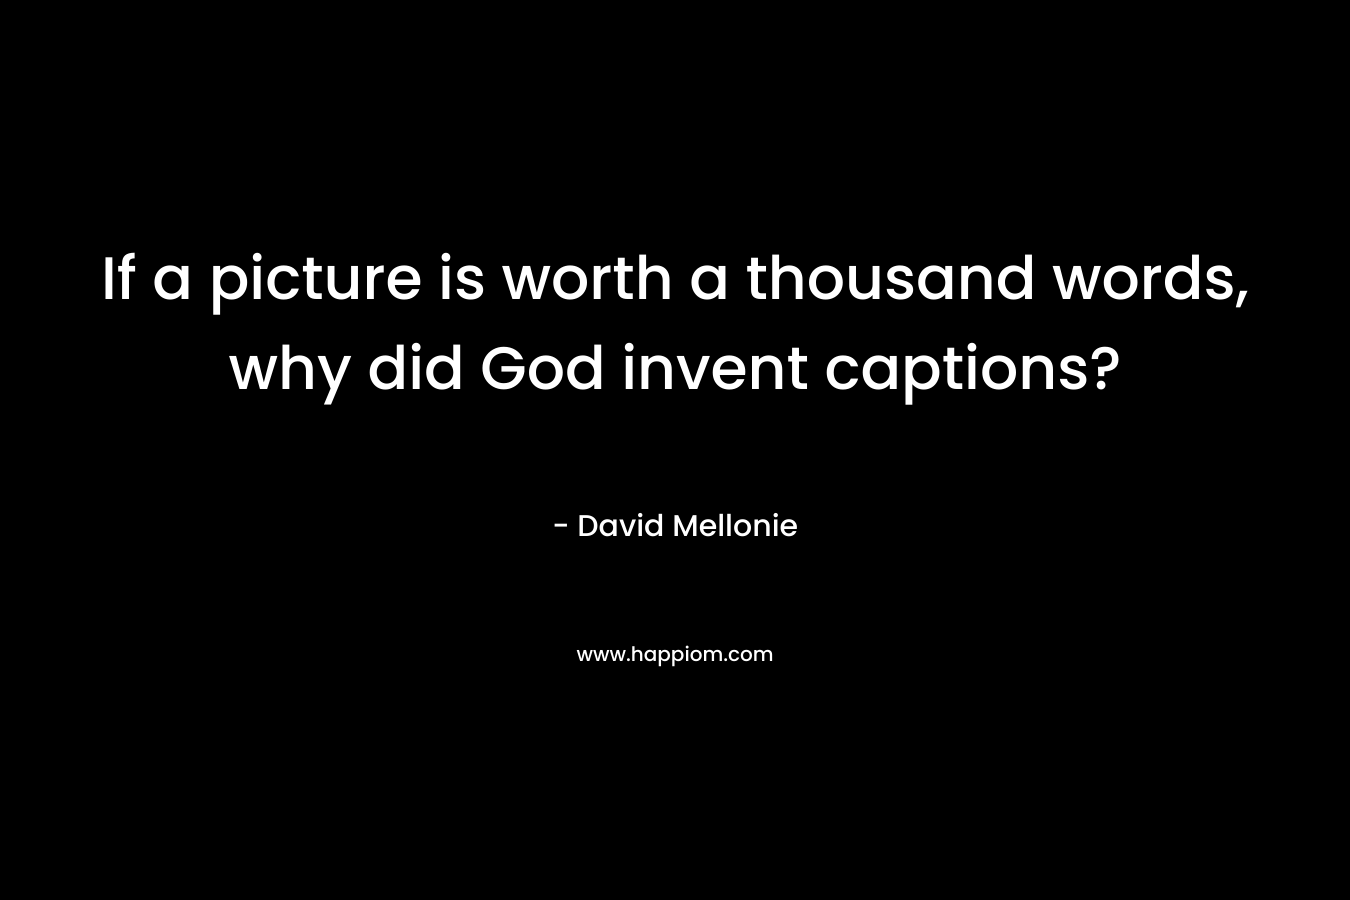 If a picture is worth a thousand words, why did God invent captions?